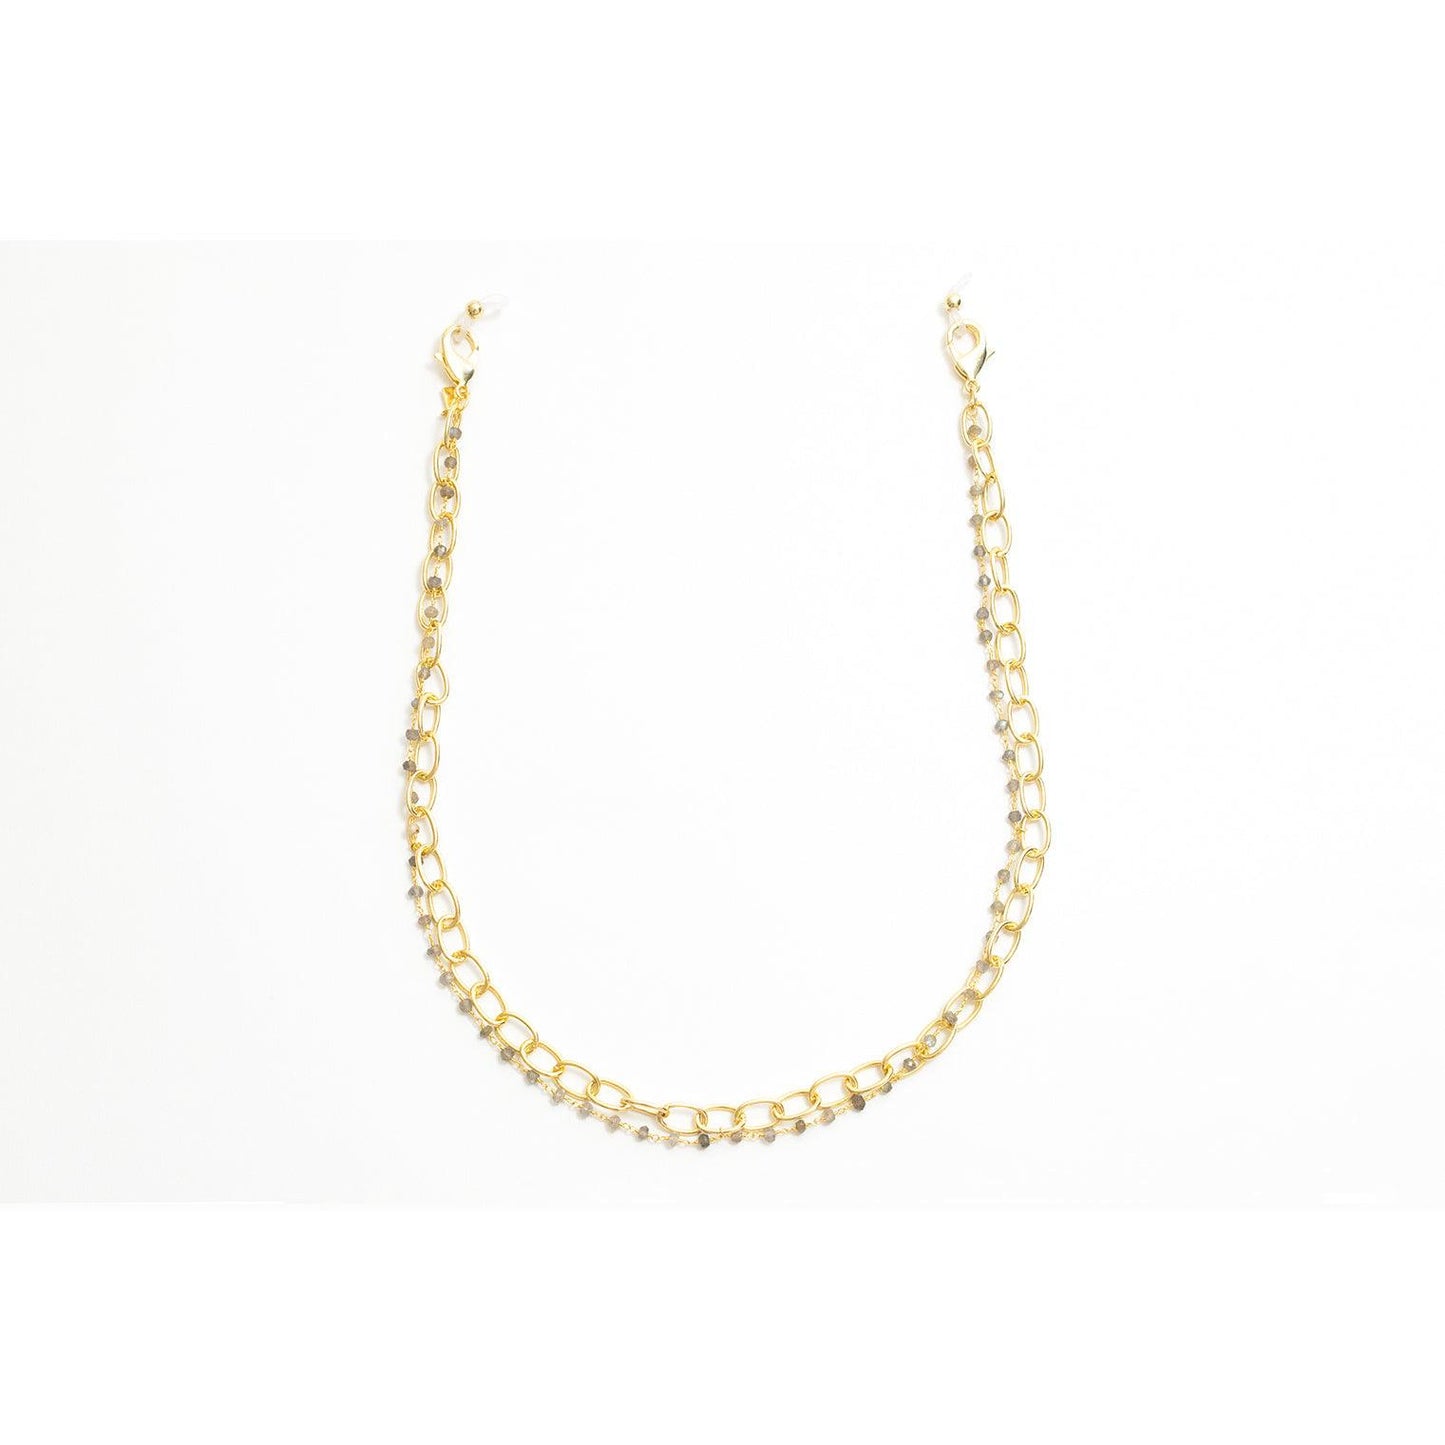 Layered Gold Chain with Natural Gems from Vint & York